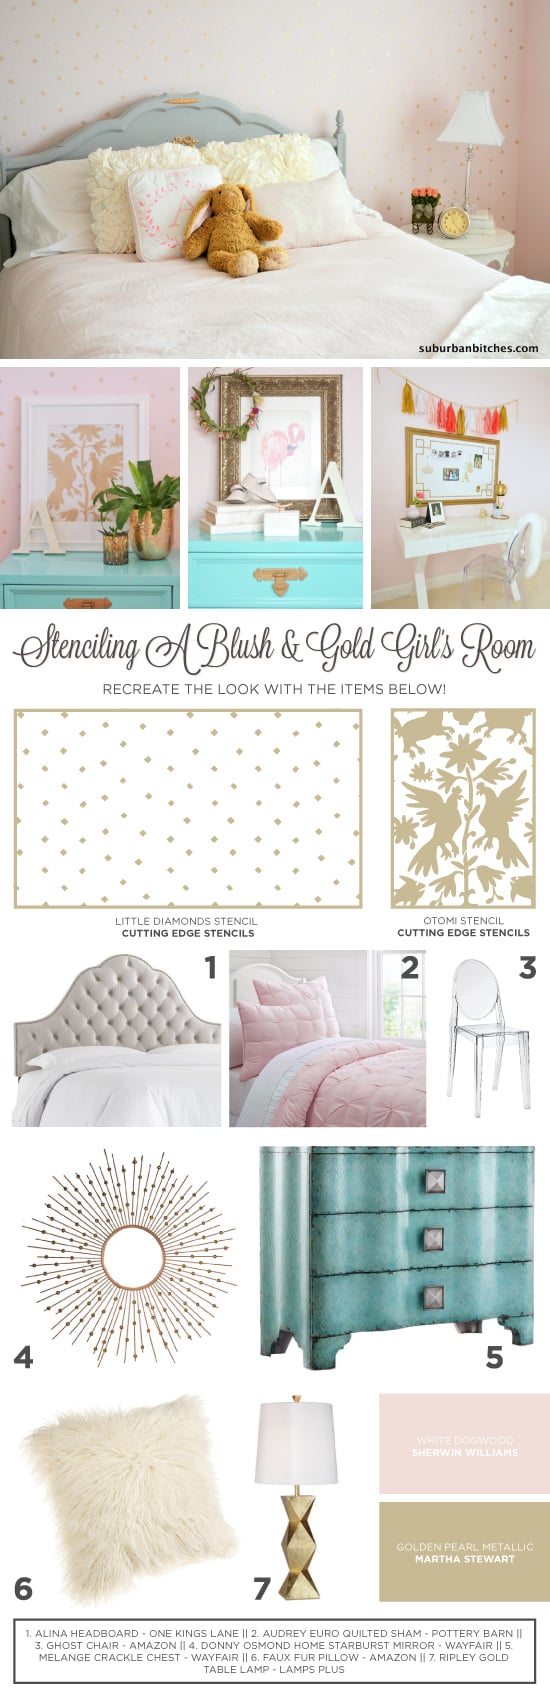 Recreate the look of this DIY blush and gold stenciled girl's room using the Little Diamonds Allover. http://www.cuttingedgestencils.com/little-diamonds-pattern-stencil-for-walls.html